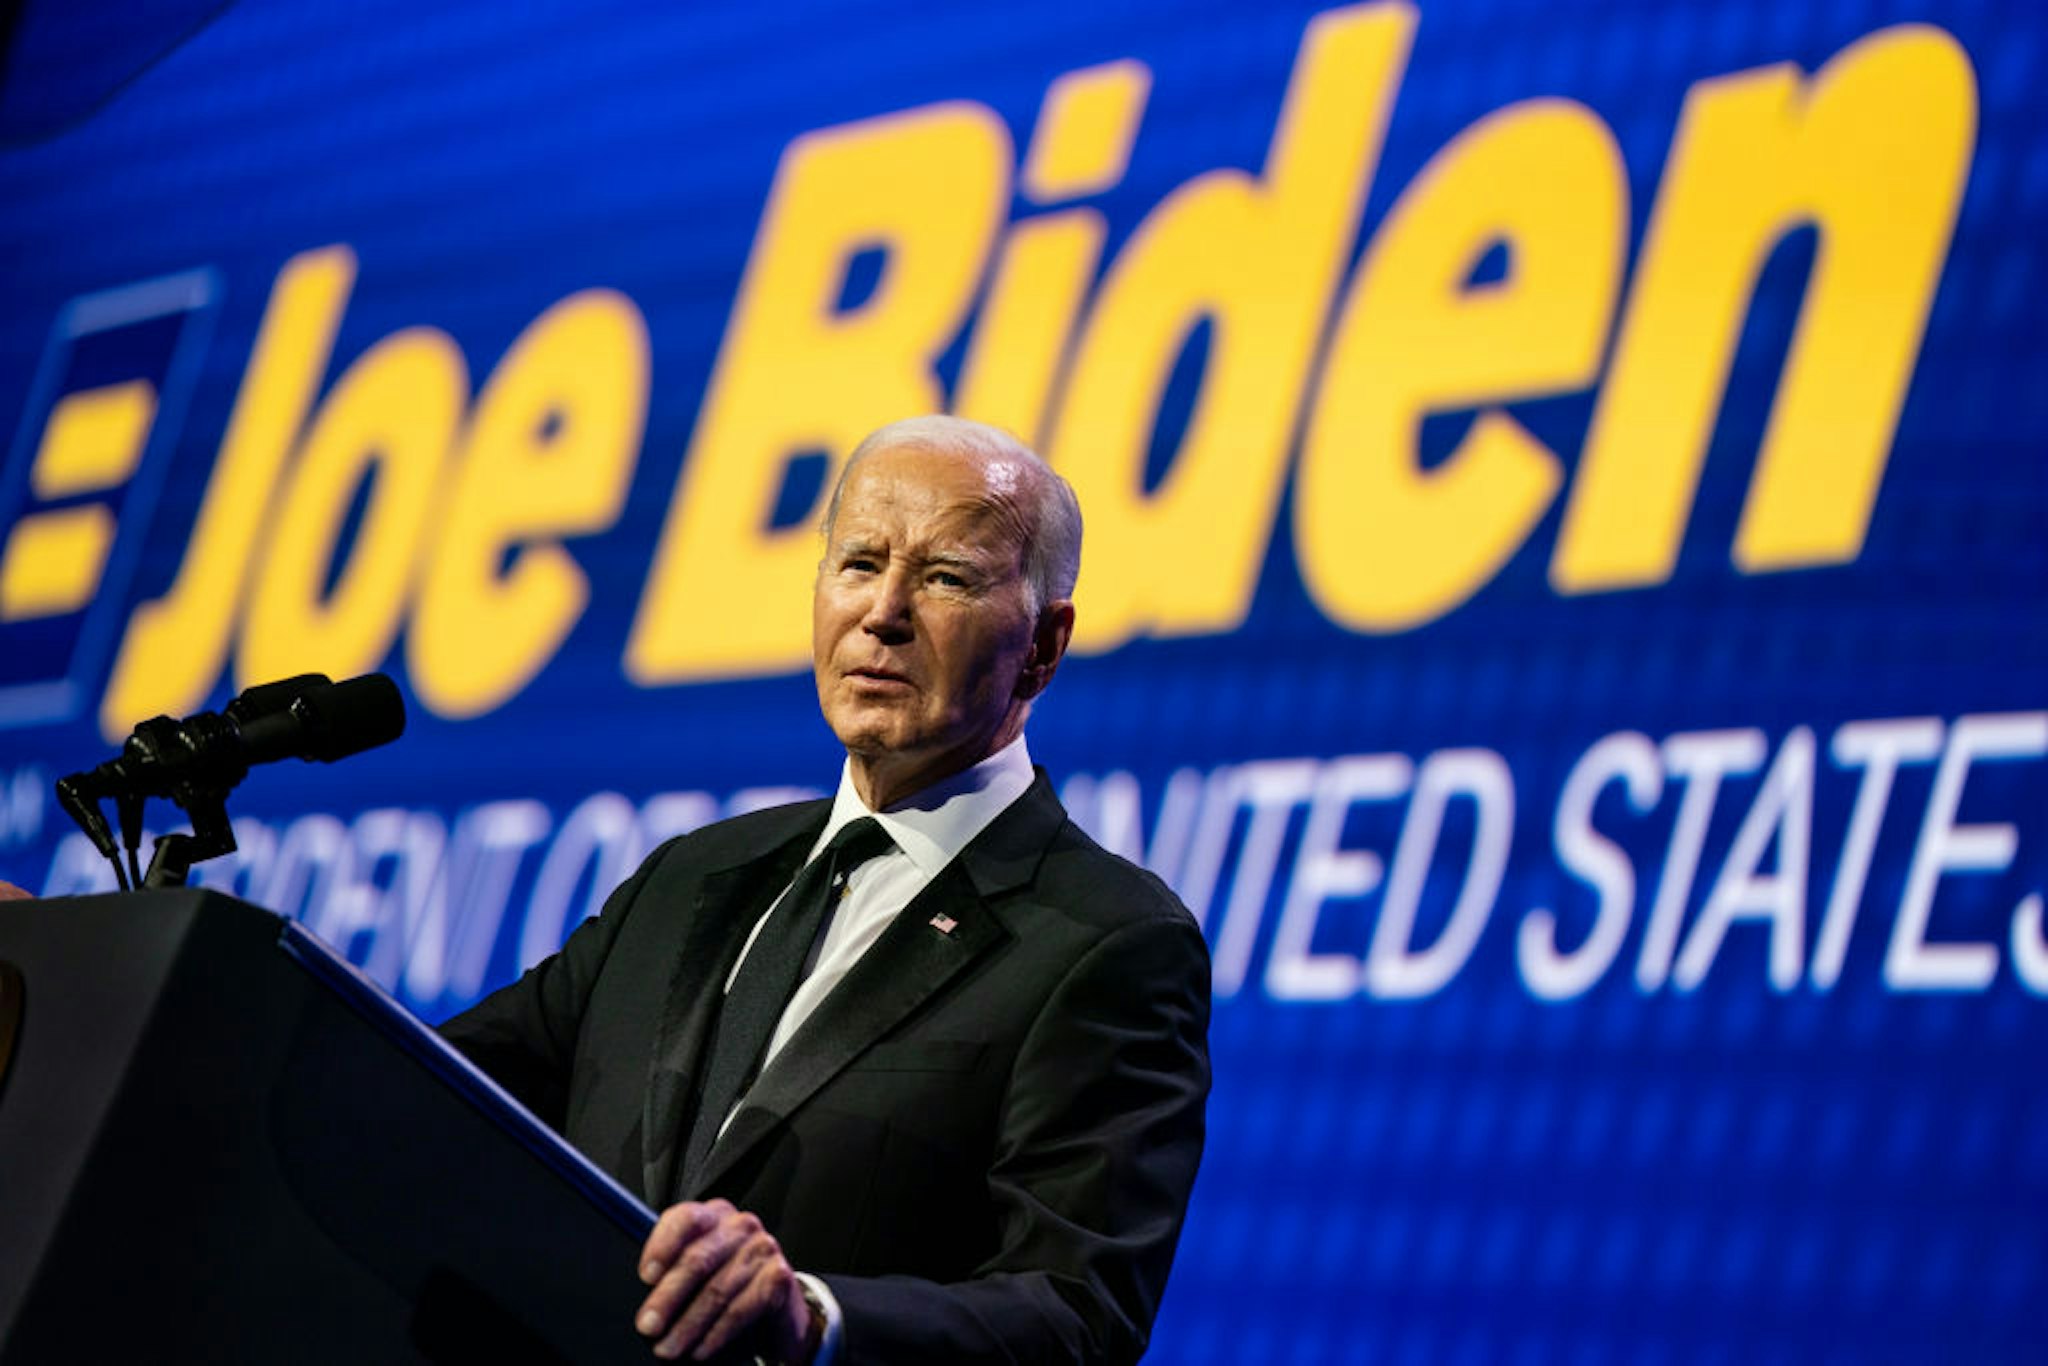 WASHINGTON, DC - OCTOBER 14: US President Joe Biden delivers remark on stage during the 2023 Human Rights Campaign National Dinner at the Washington Convention Center on October, 14, 2023 in Washington, DC.